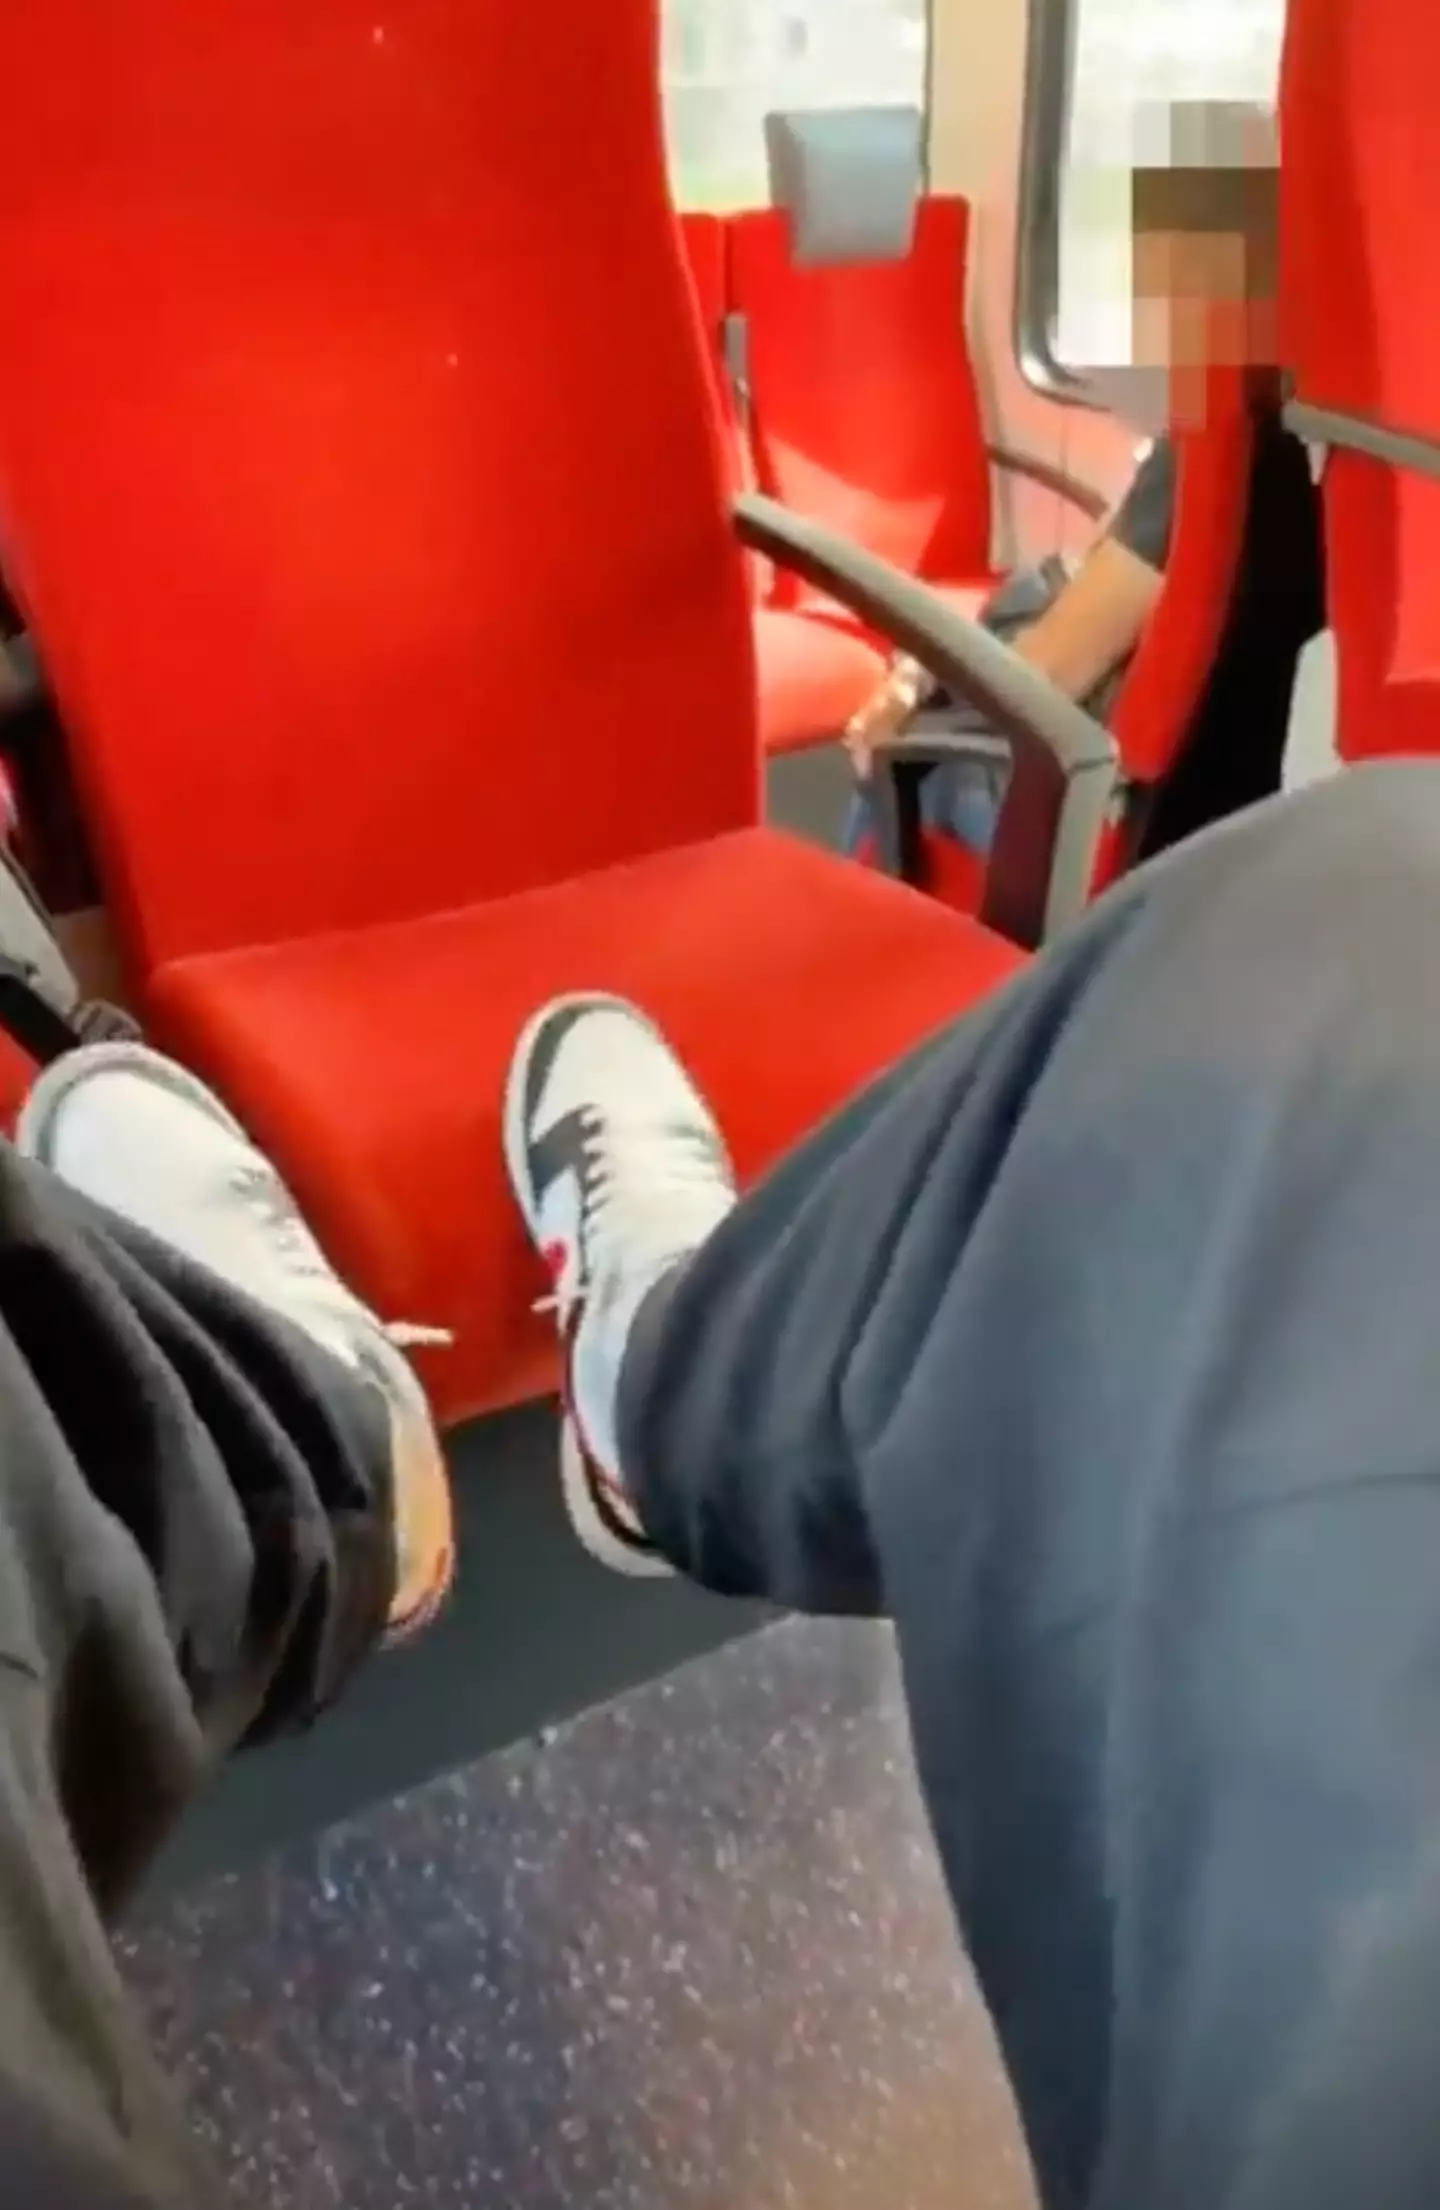 A TikTok of a man putting his feet on a train seat has sparked a major debate.